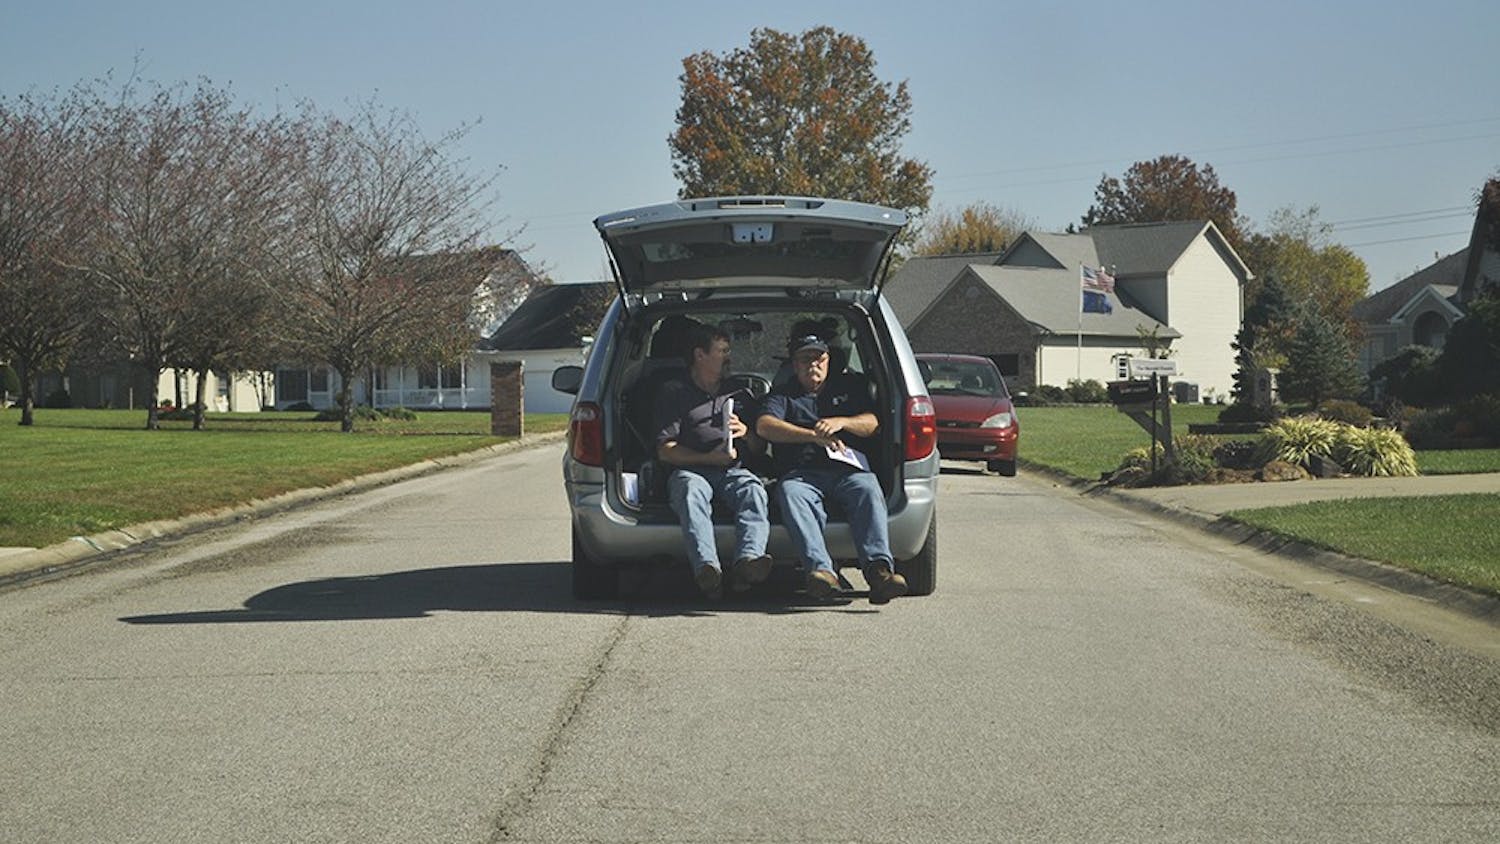 Sparks and former Speaker of the House and 2012 governor candidate, John Gregg, drove around in Green Acres, a newer neighborhood in Linton. Sparks canvassed on the weekends trying to reach out to those who hadn't voted yet and convince them to go to the polls. Gregg would often be present to gain public support for Sparks' campaign.